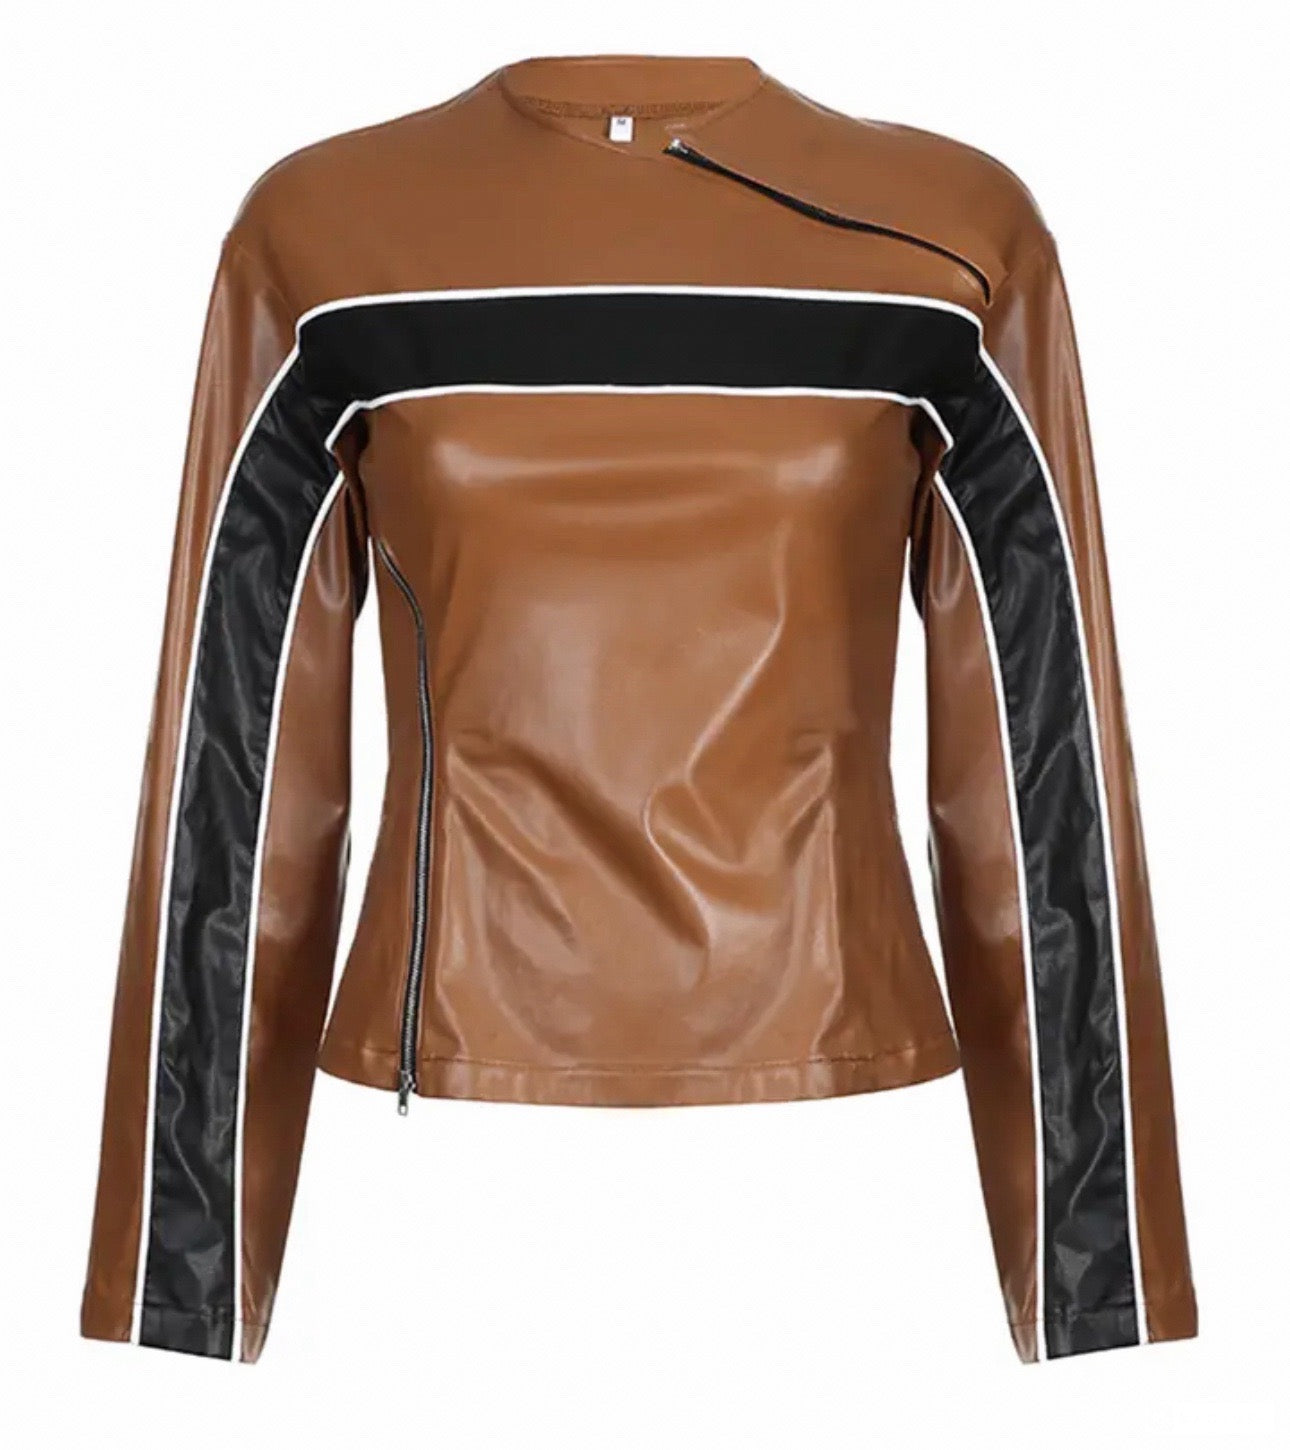 Priority Faux Leather|Top PRE ORDER